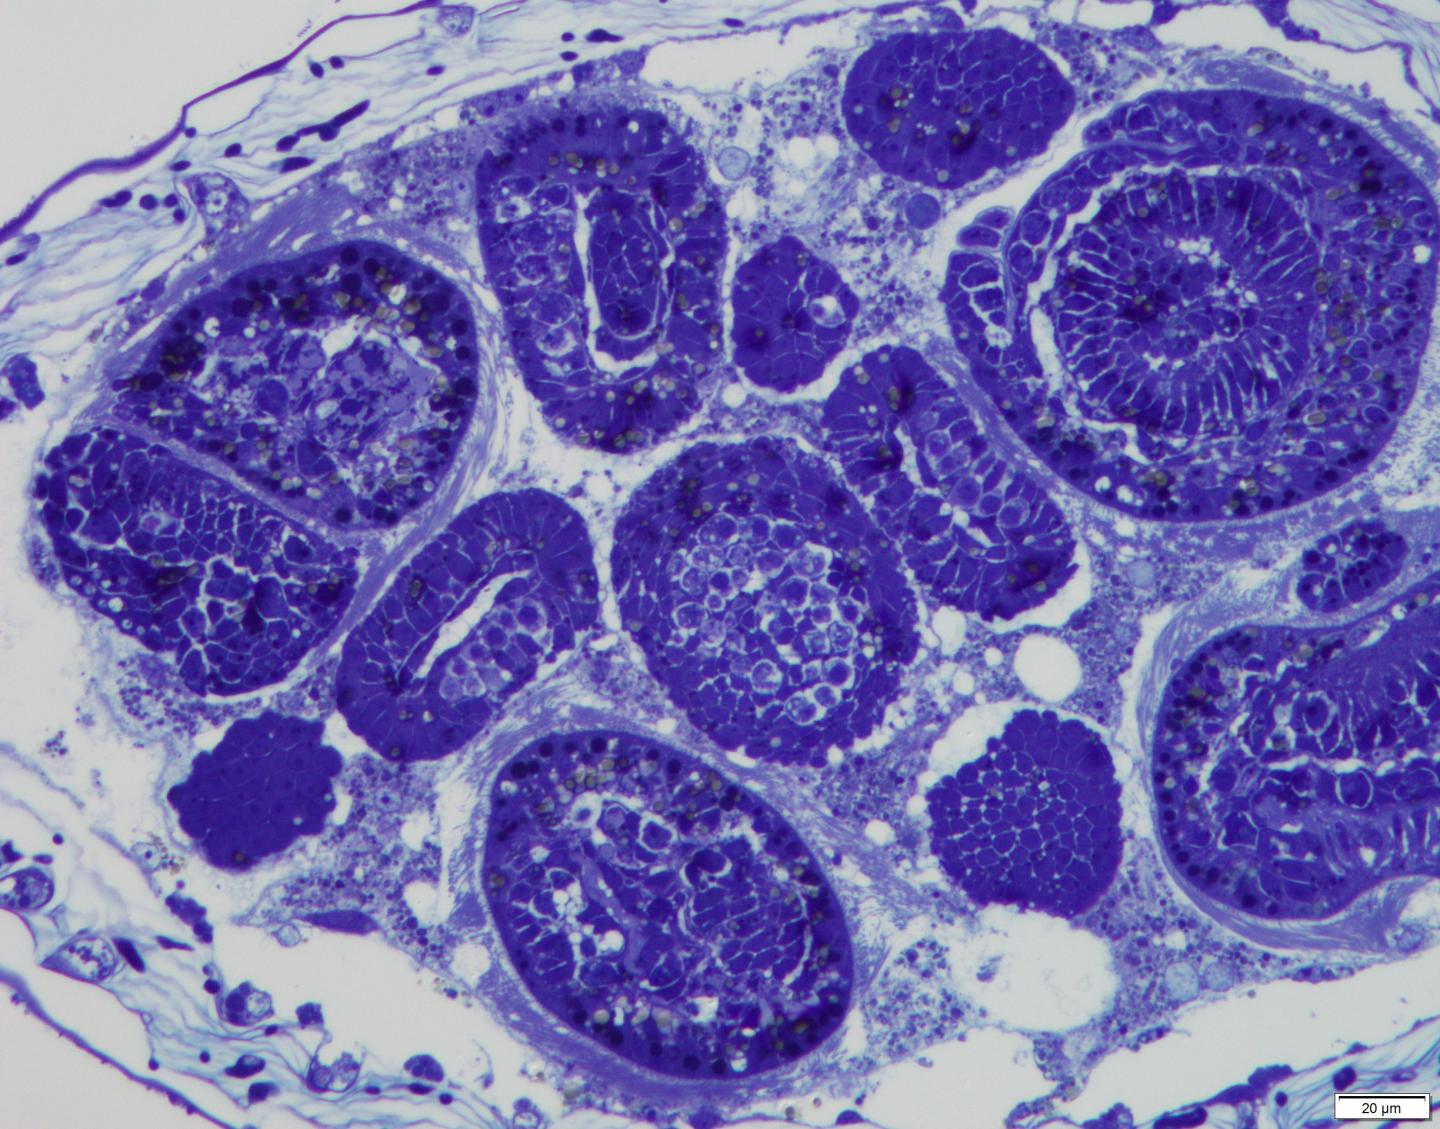 The histological section of a gonozooid